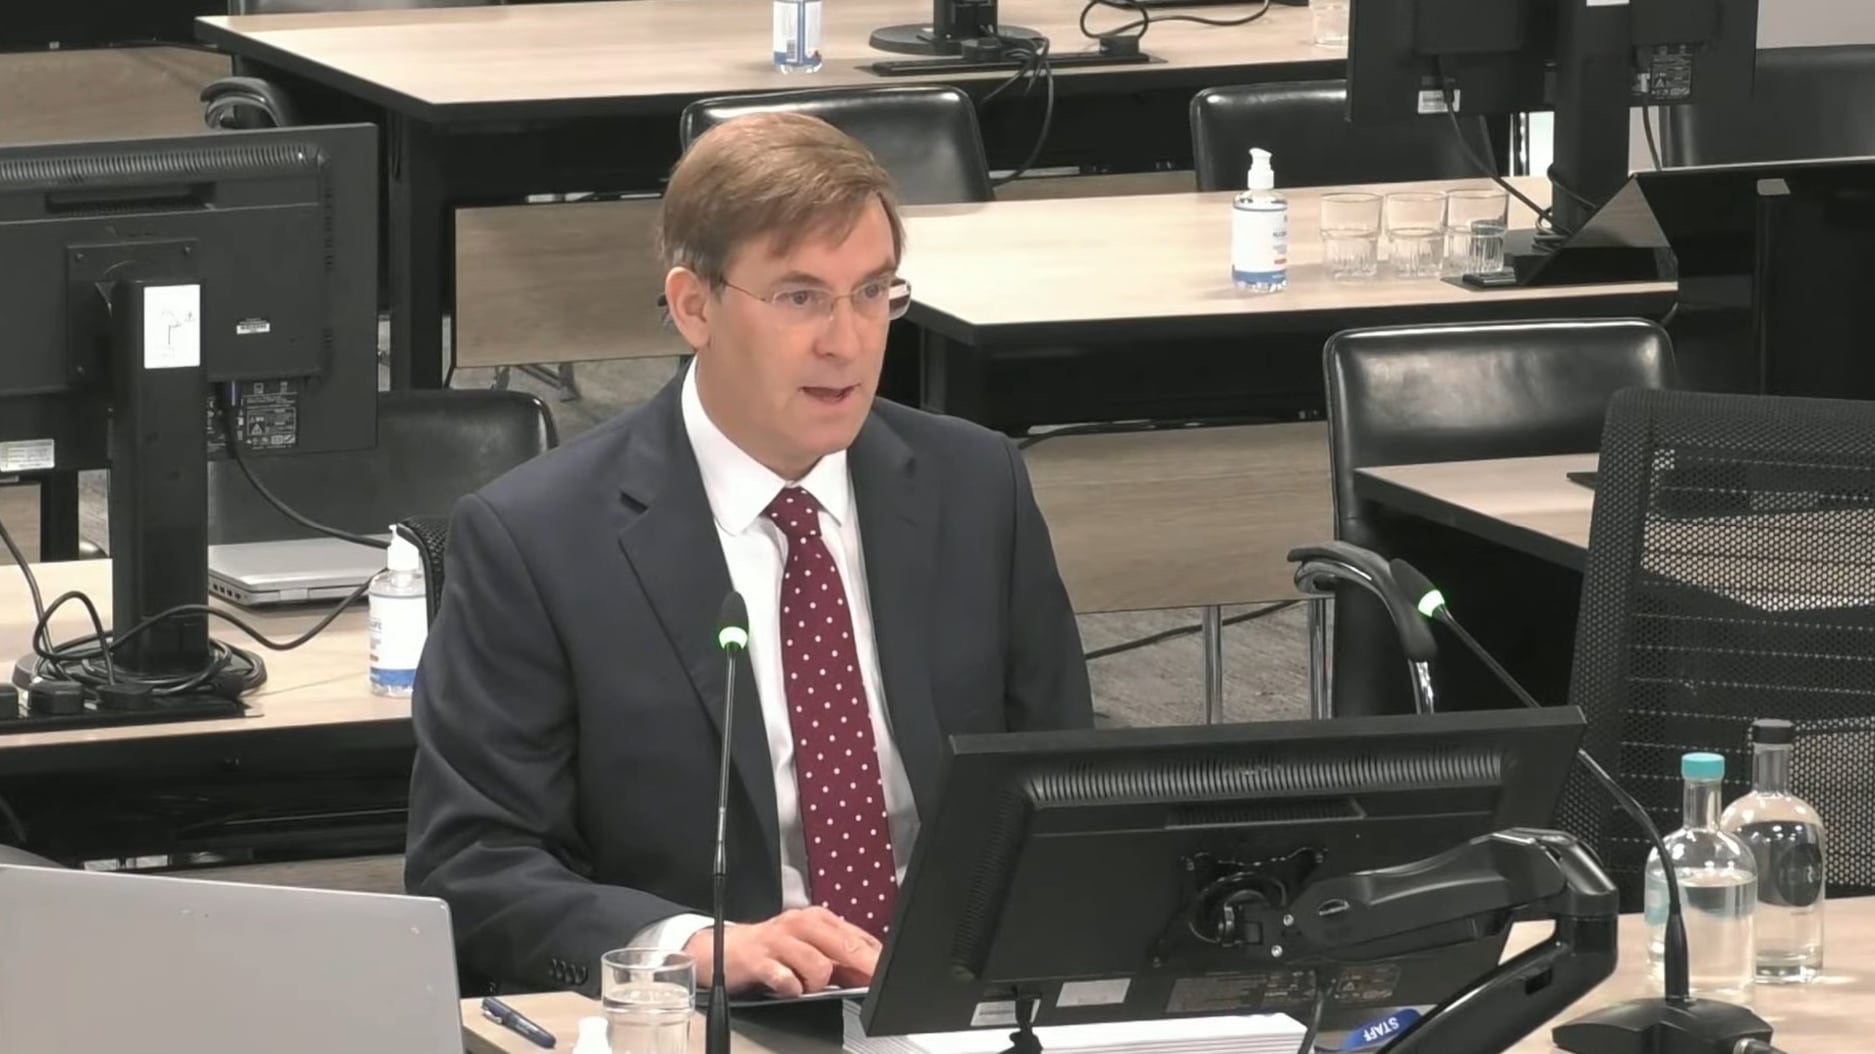 David Barr KC made his opening statement in the second stage of the inquiry on Monday